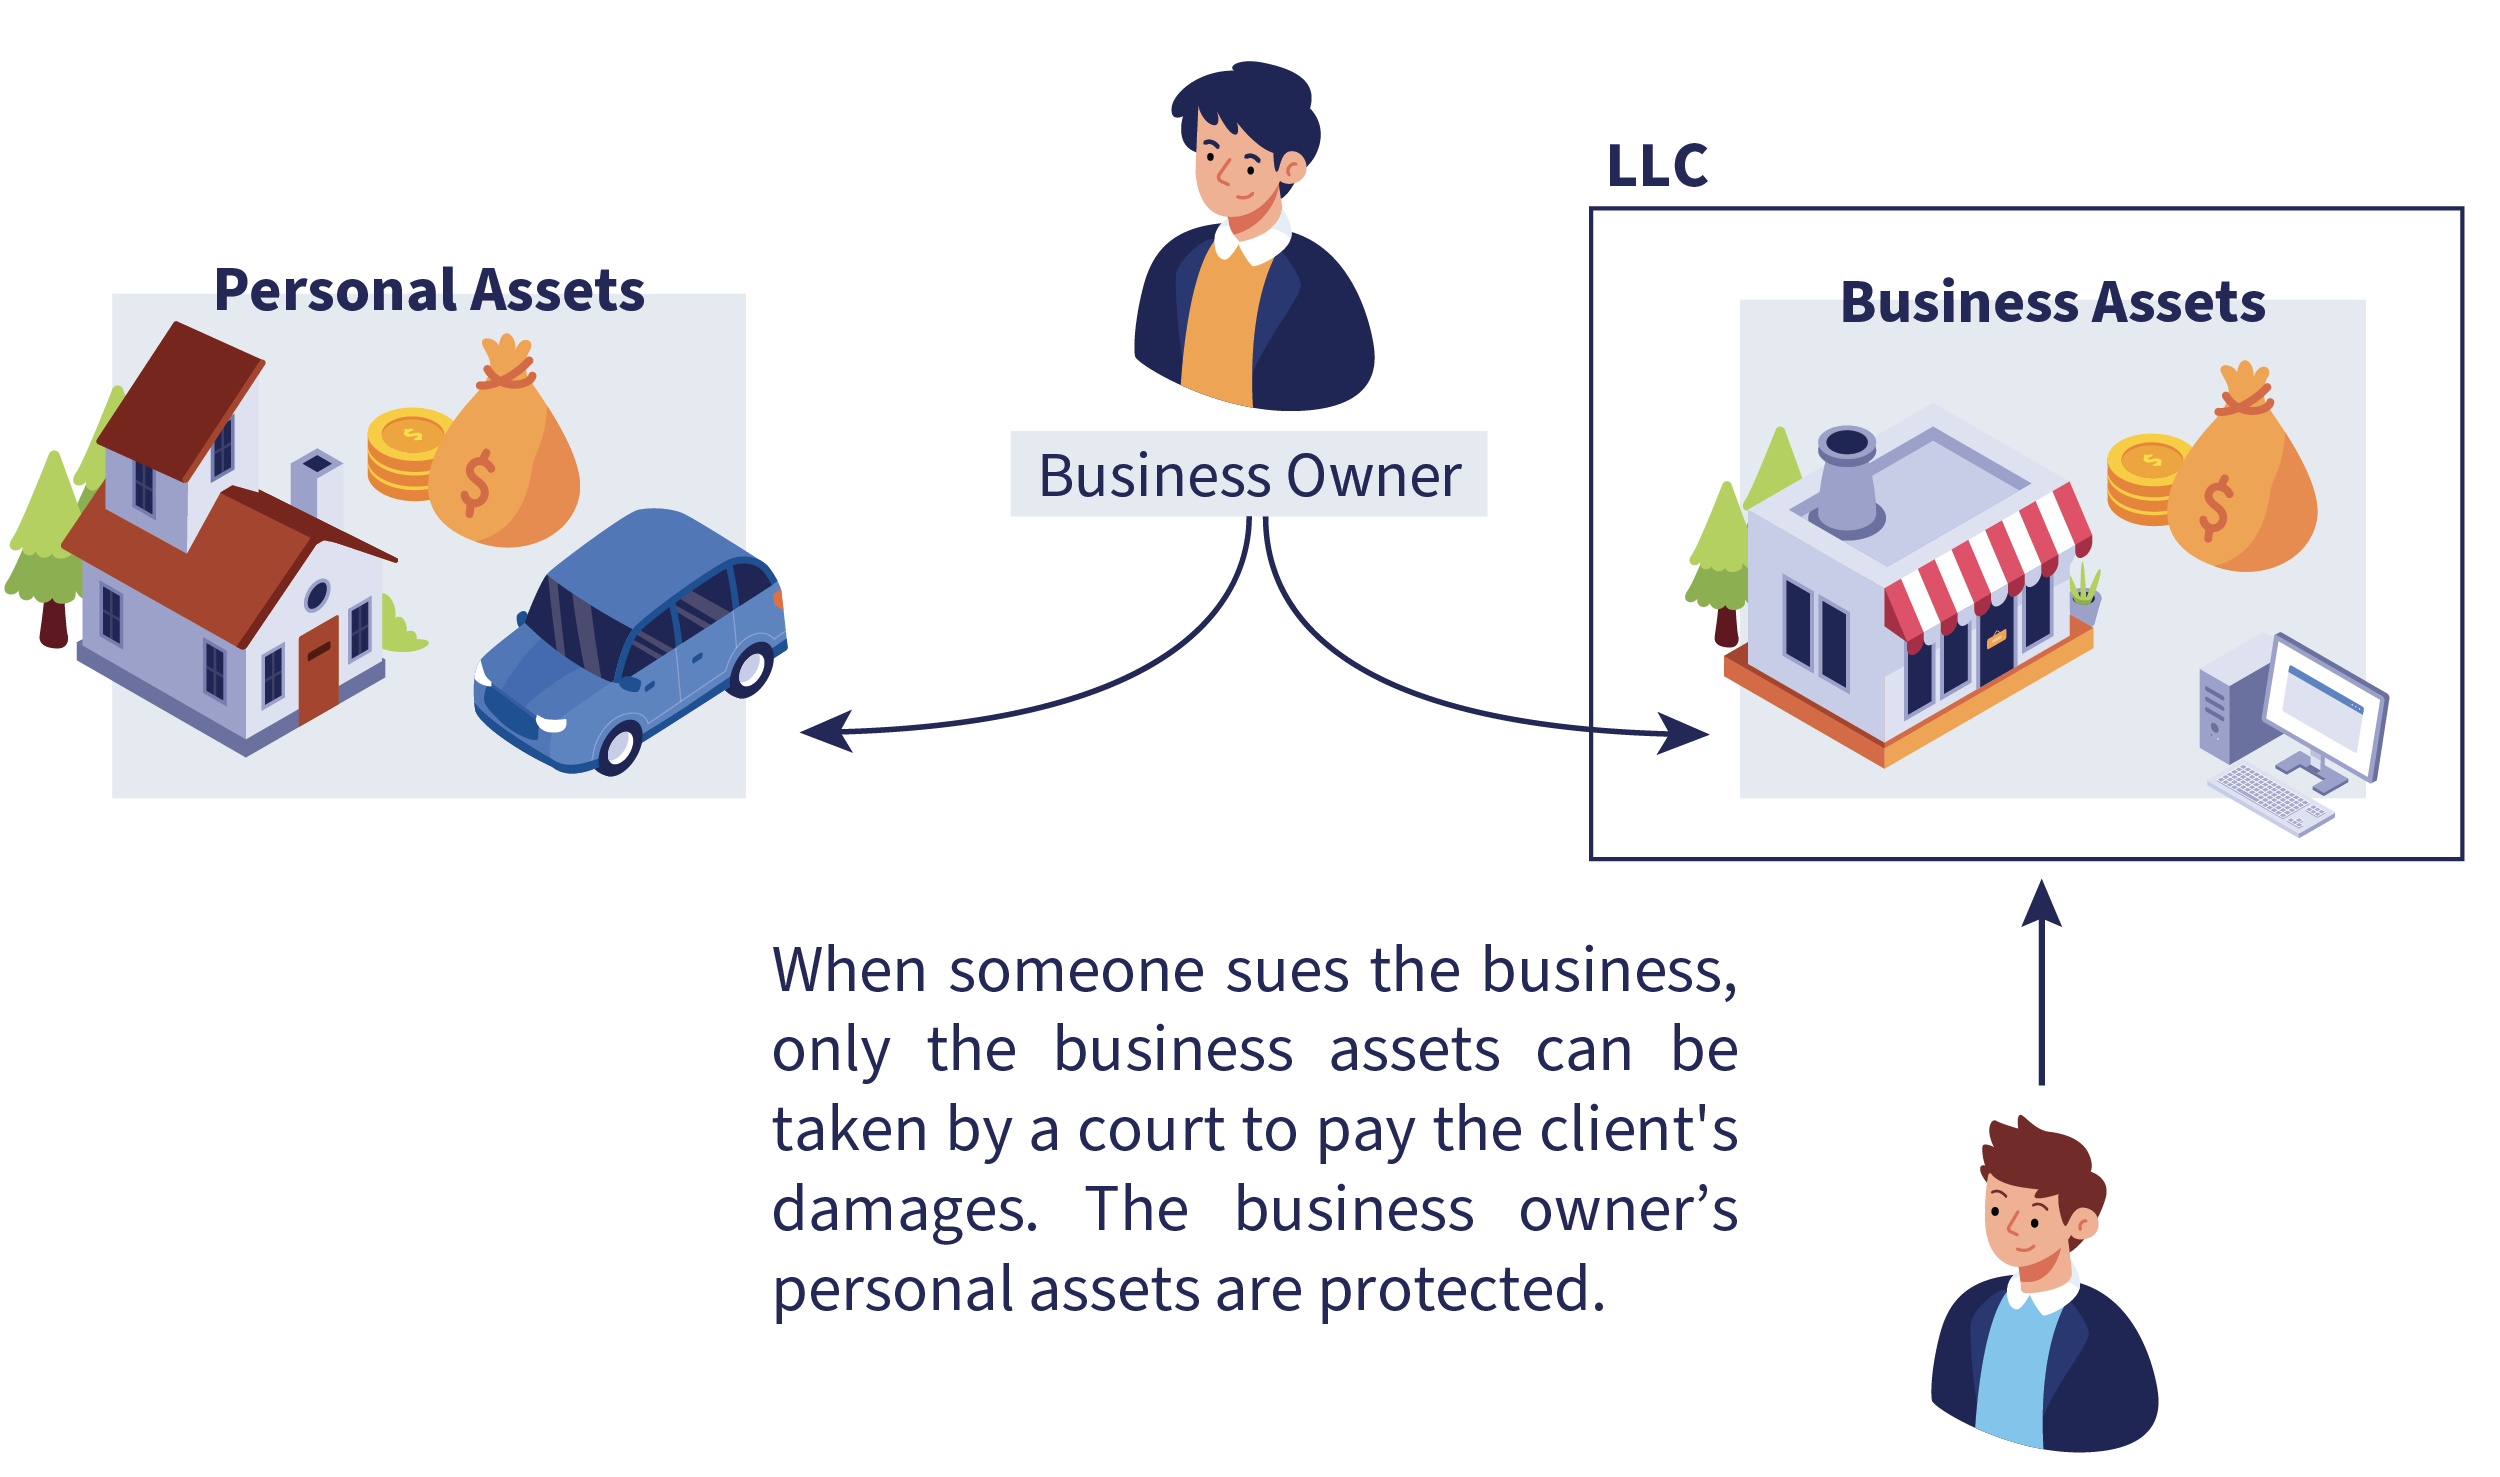 Graphic showing steps to form an LLC